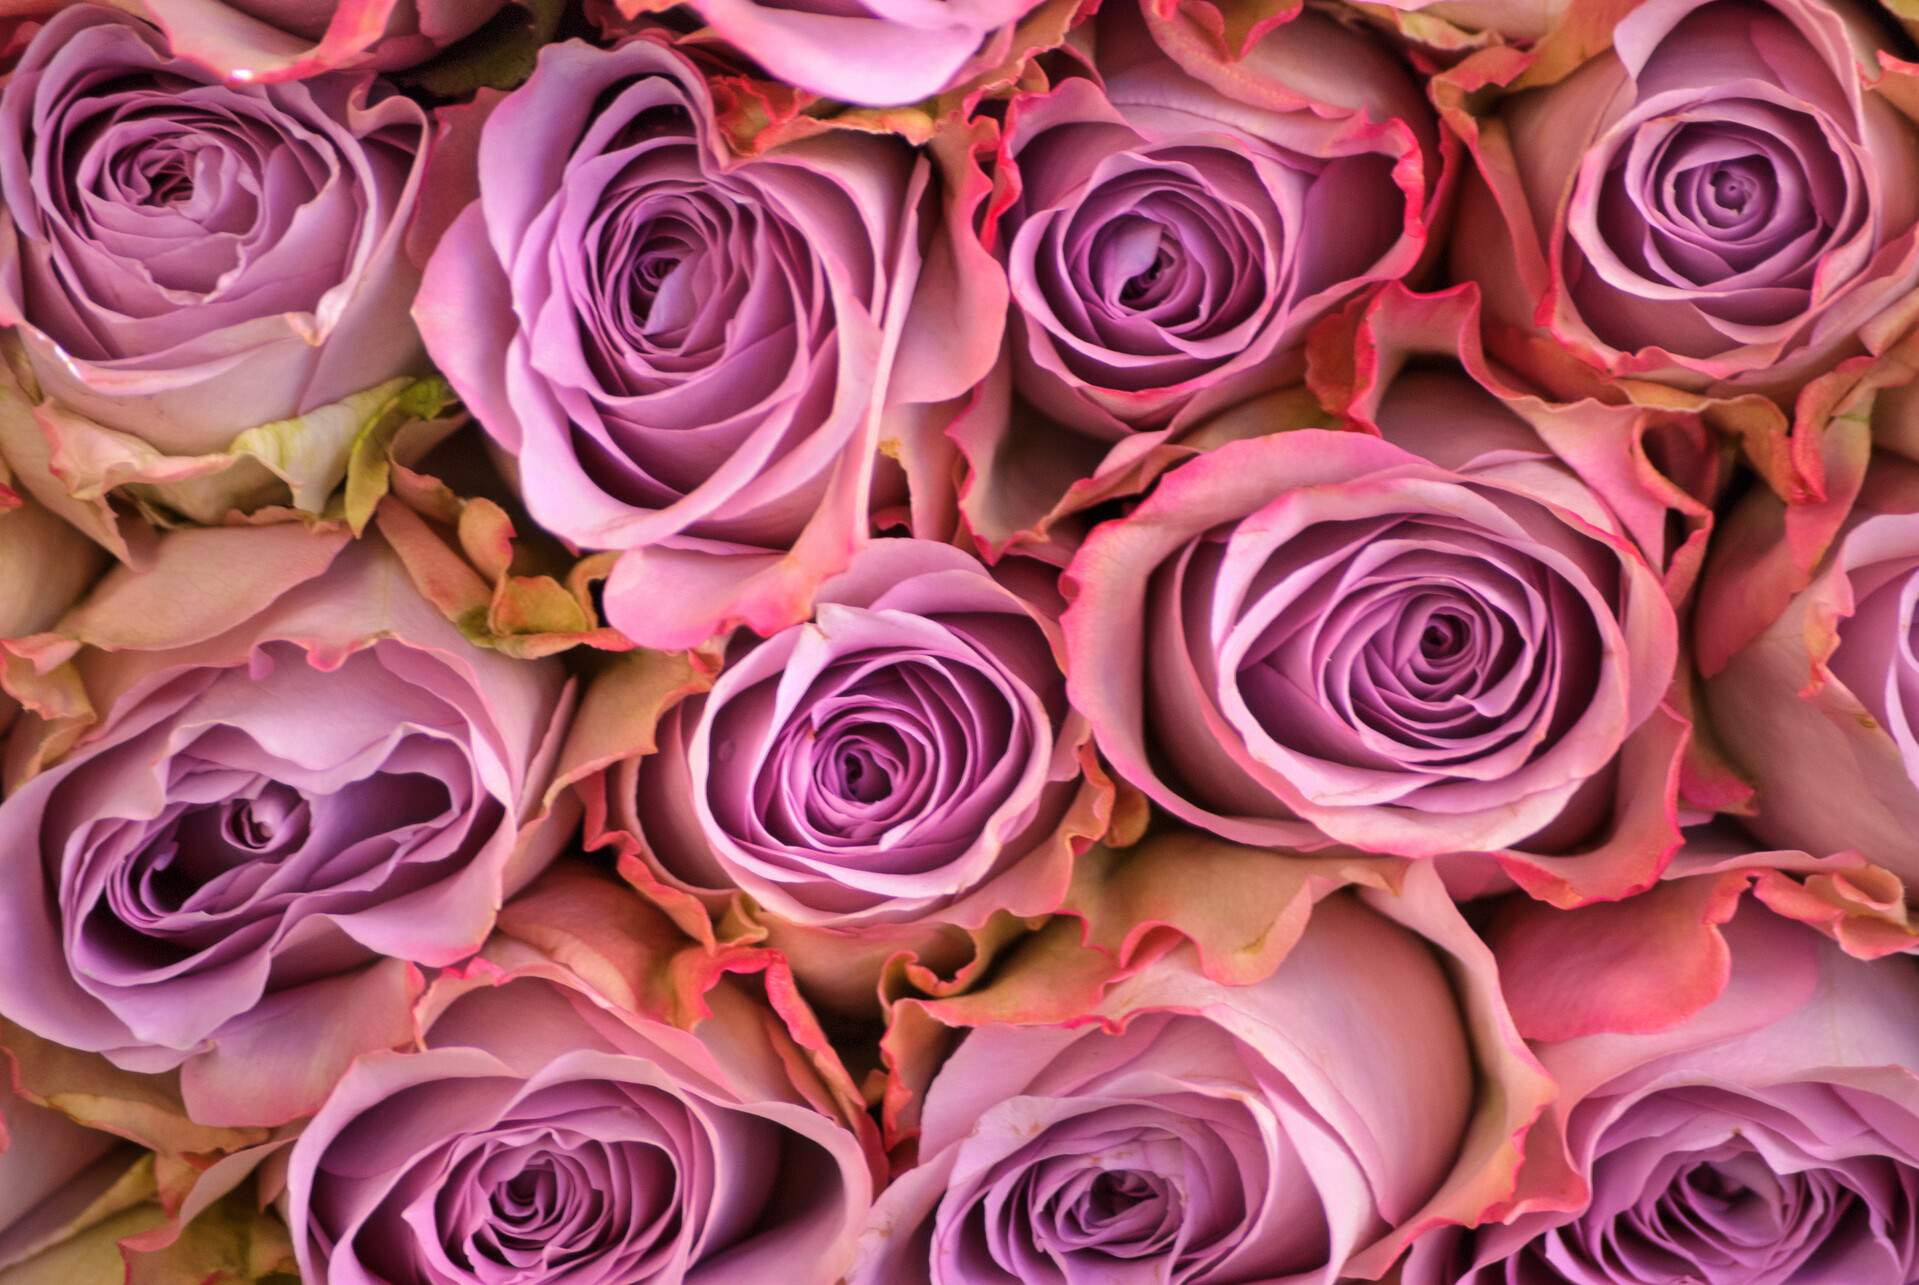 Roses in beautiful shades of pink.